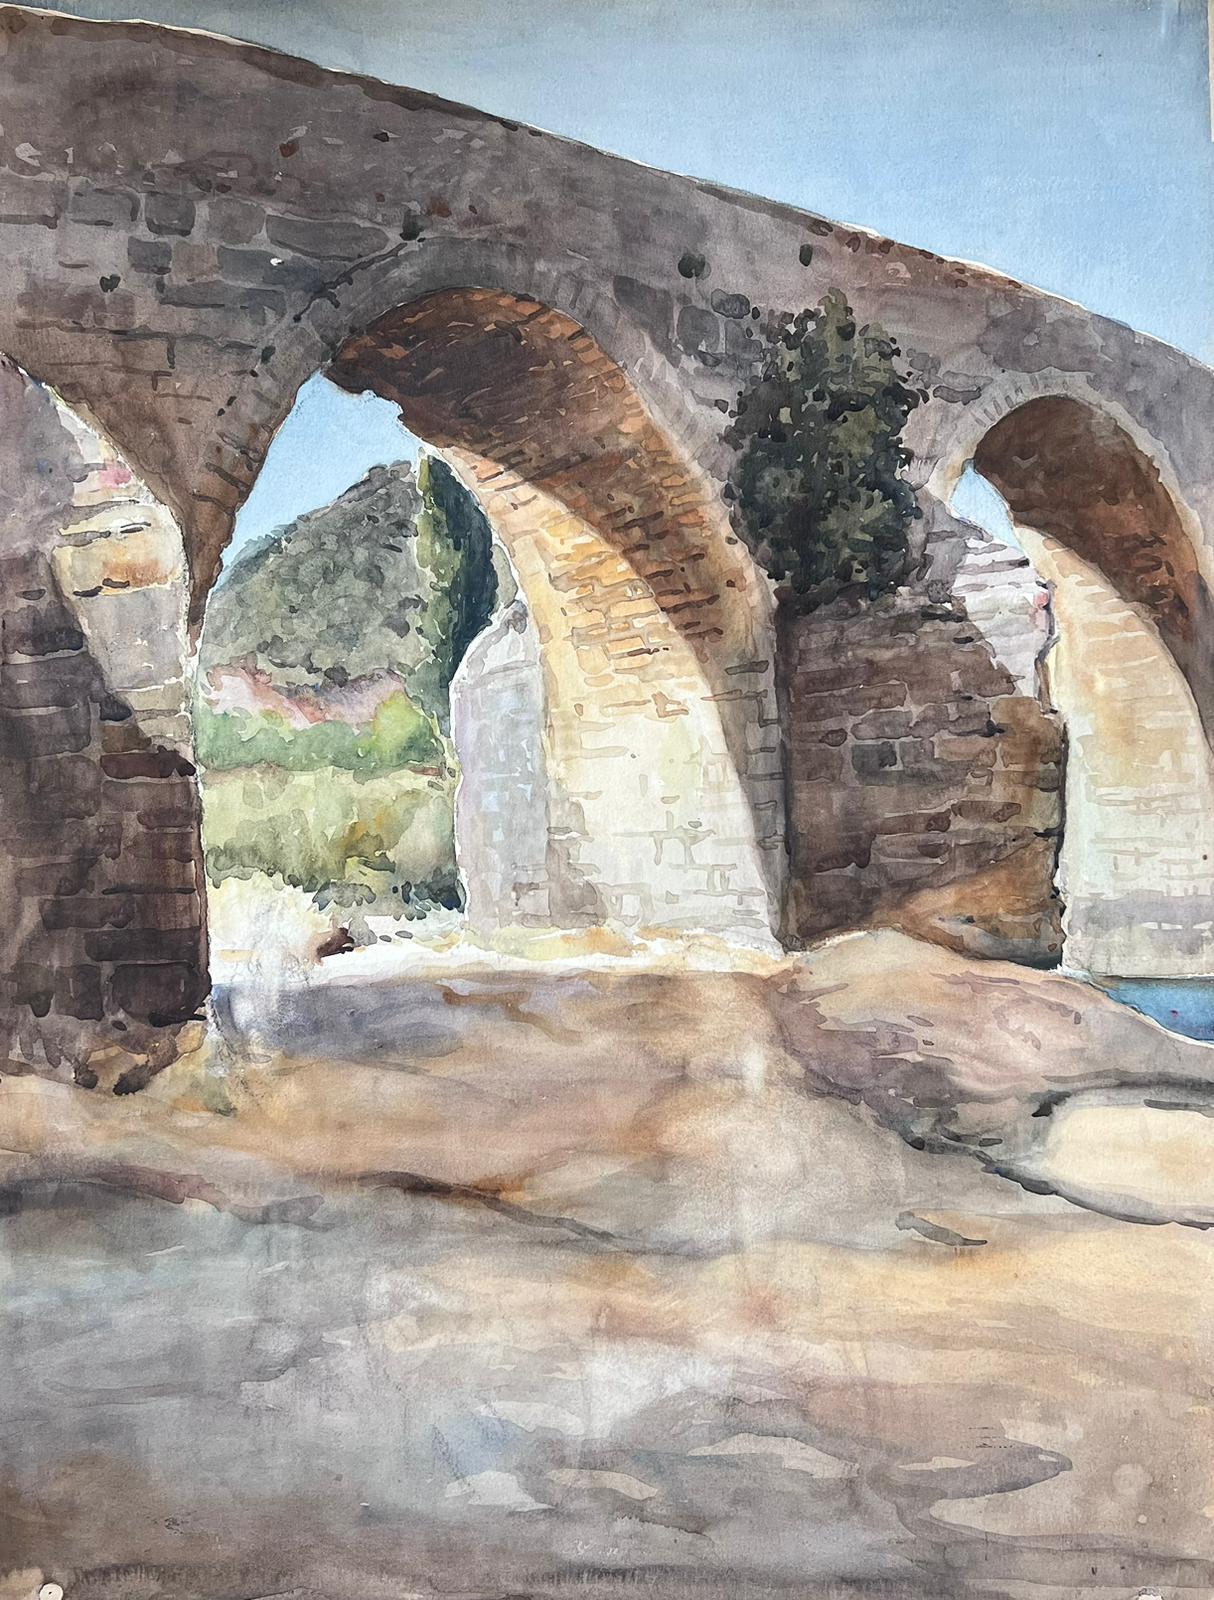 Vintage French Impressionist Painting Stone Bridge Viaduct in Landscape